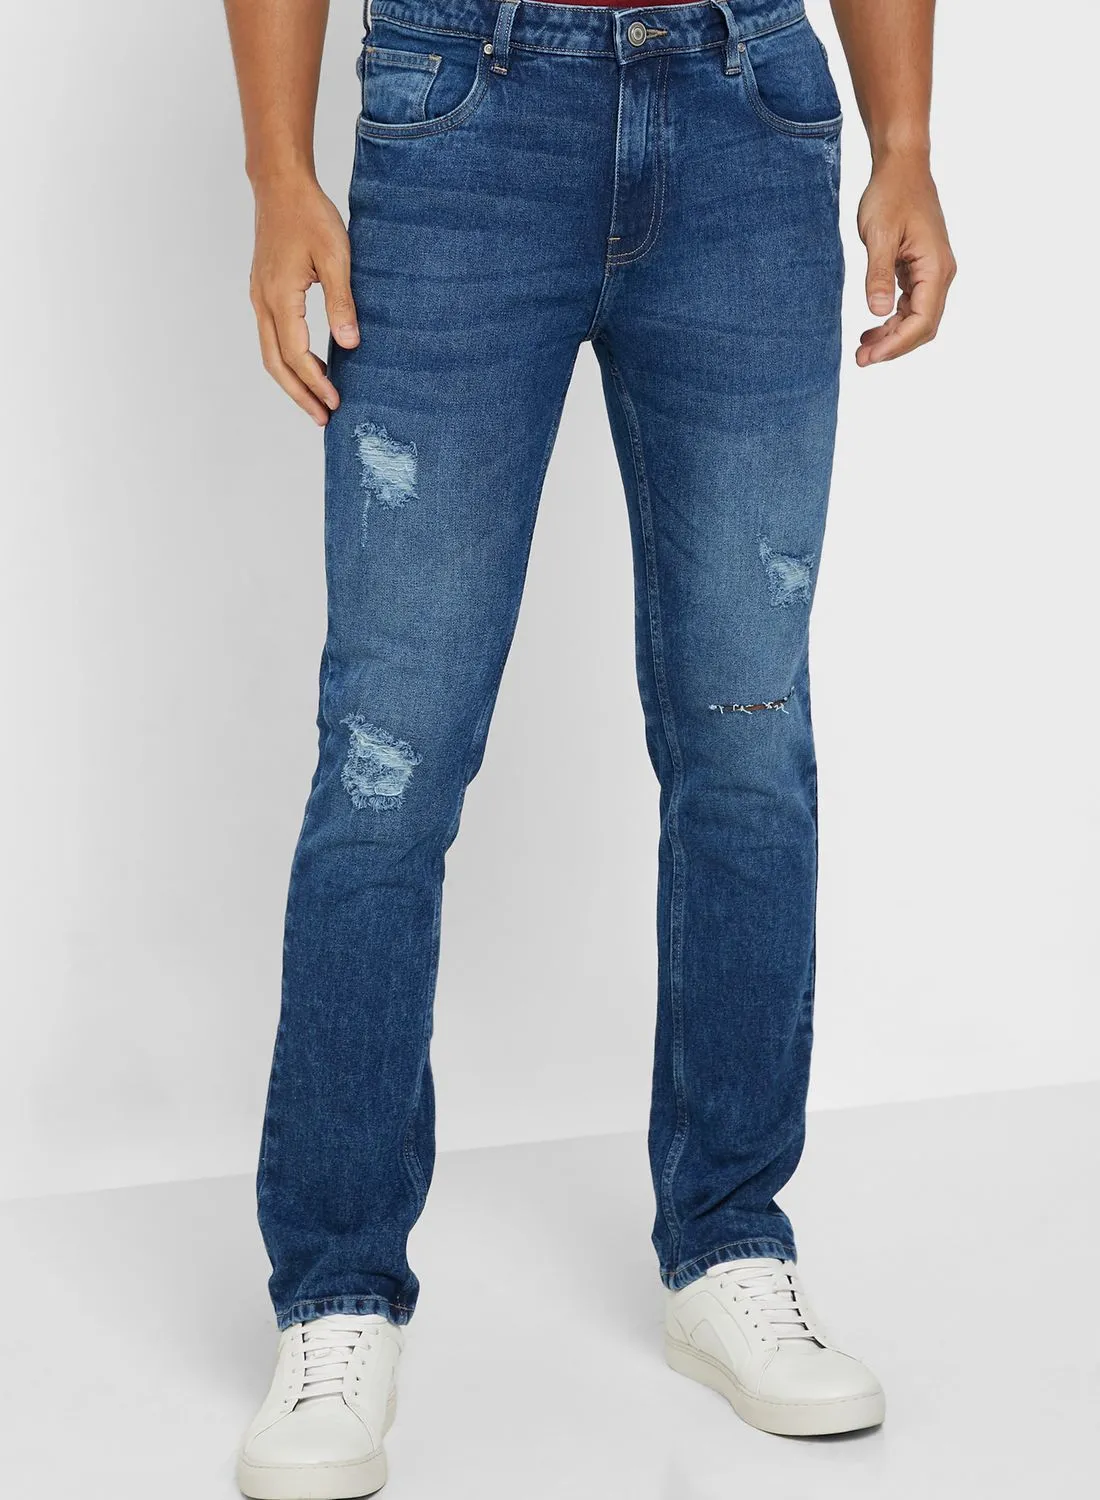 Seventy Five Slim Fit Ripped Jeans